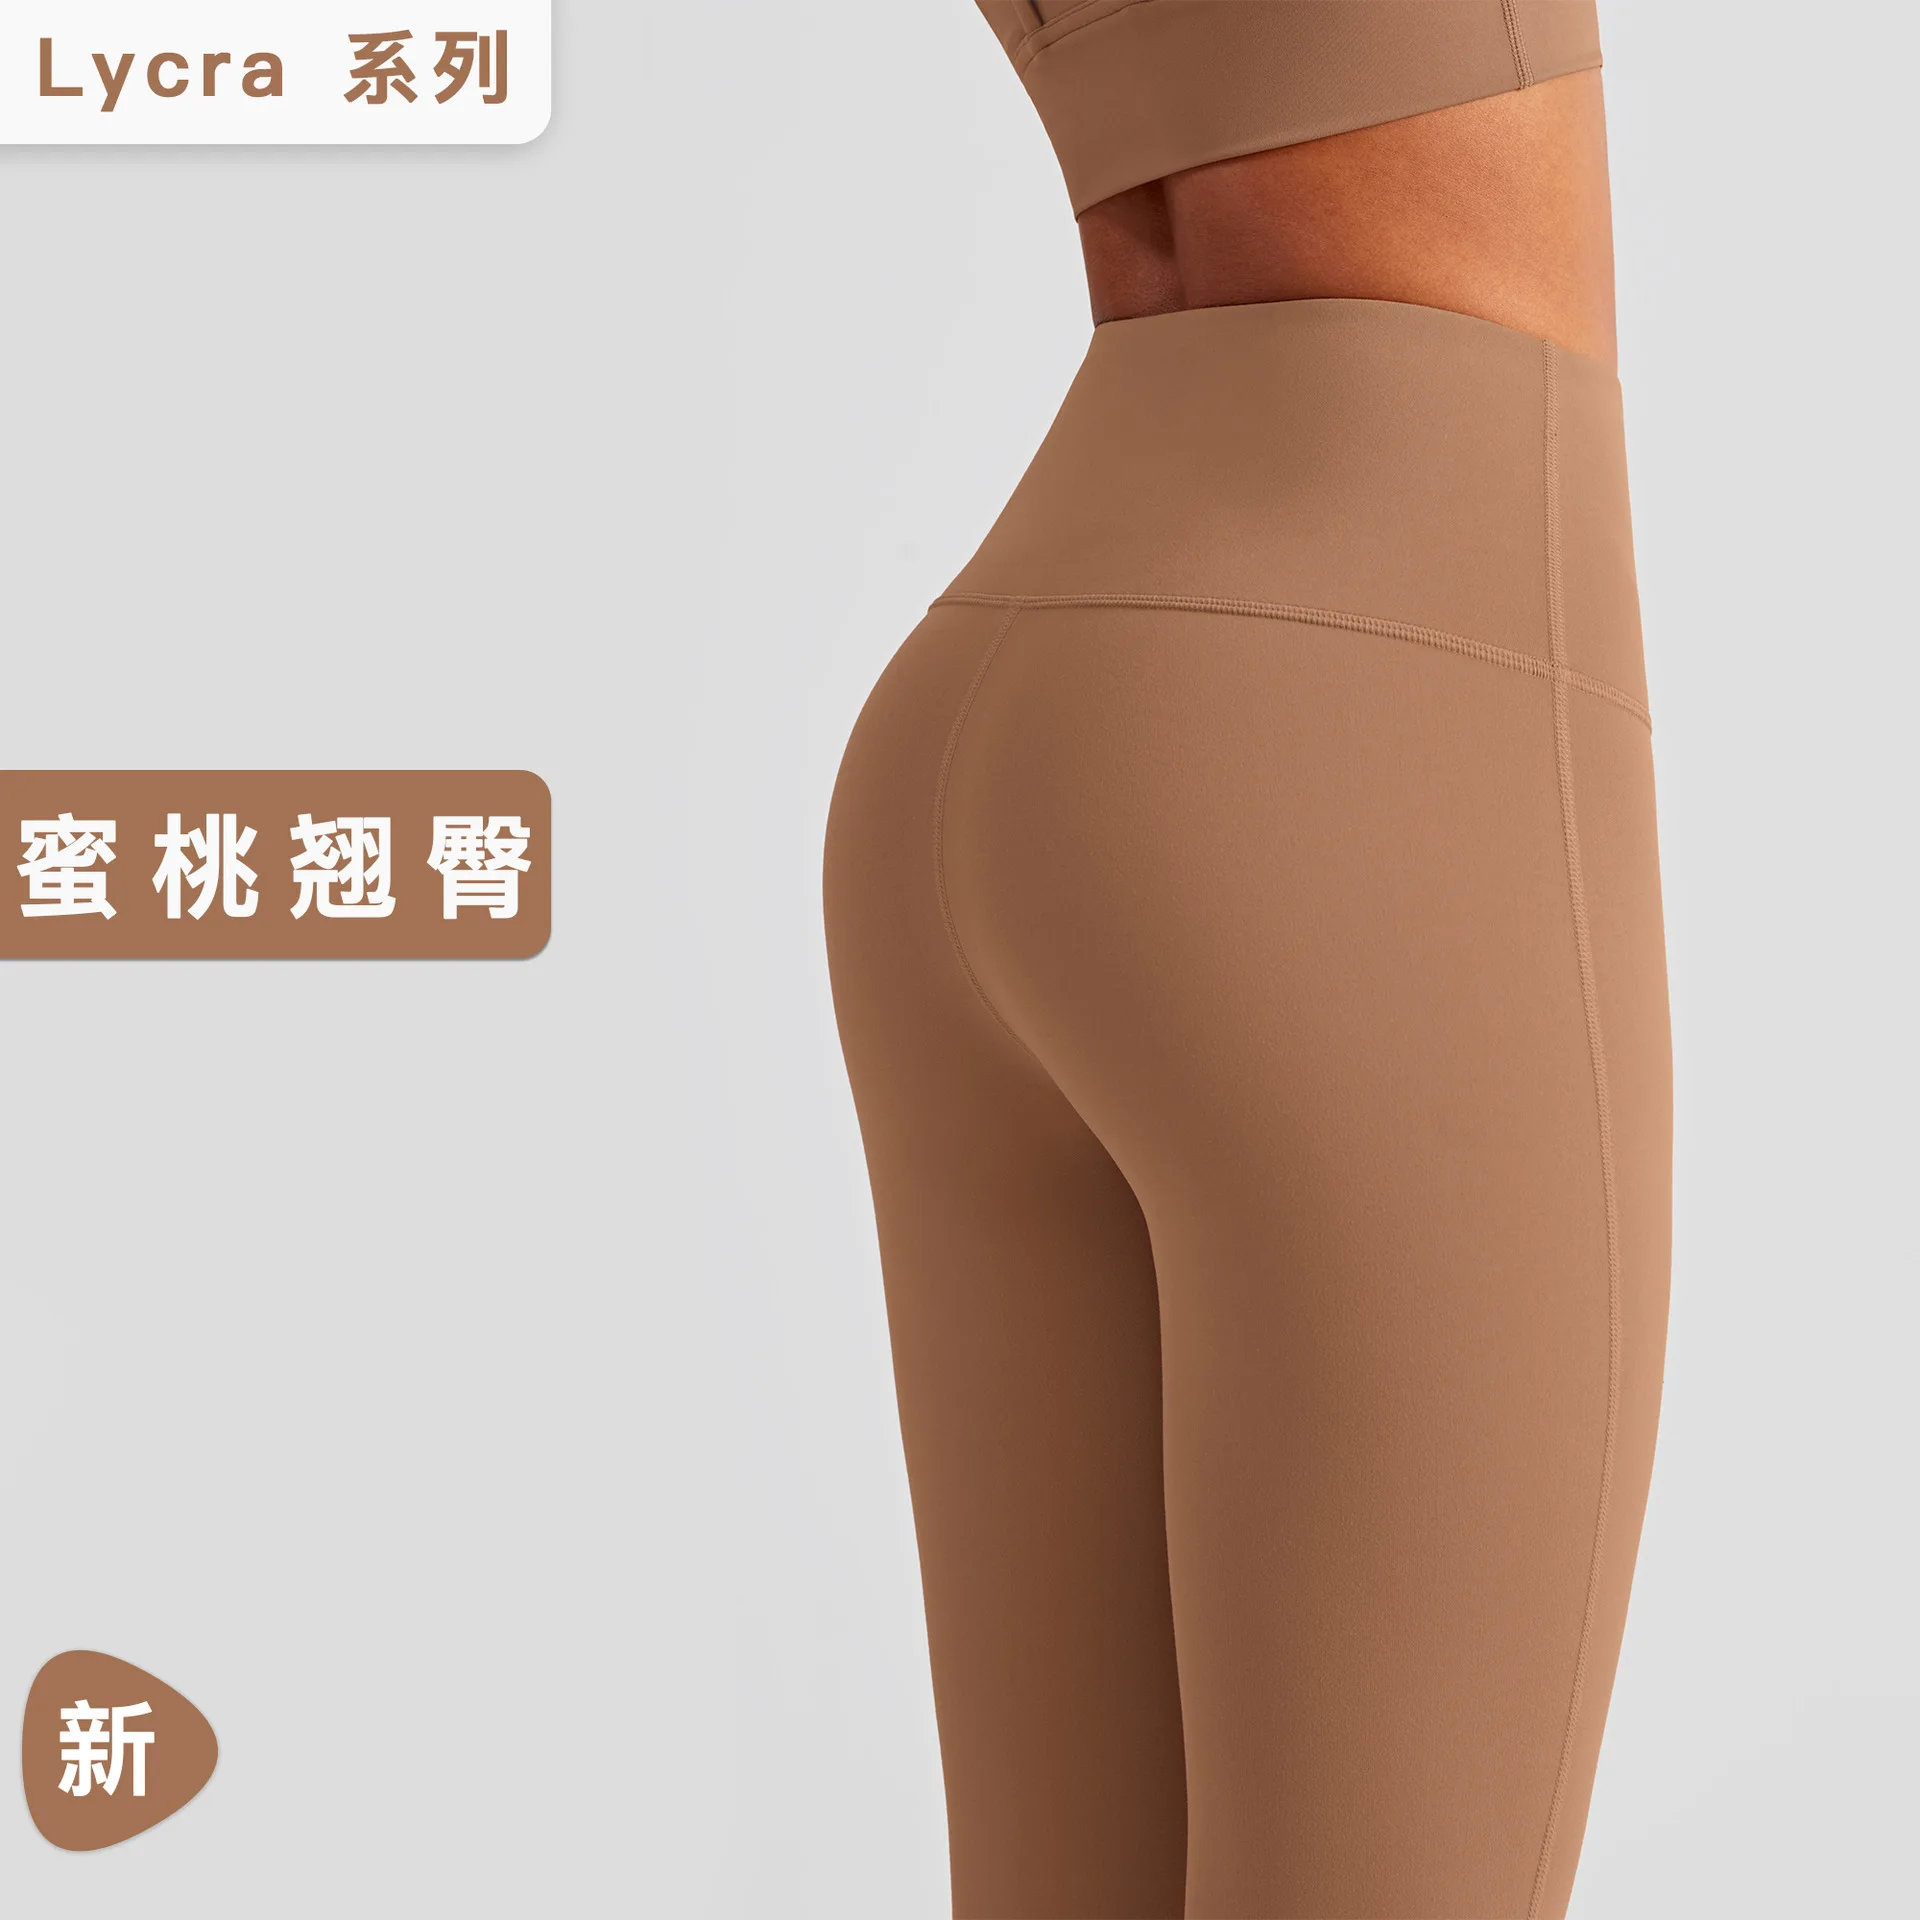 New High Waist Lycra Lulu Yoga Pants High End Nude Without T Comfort Peach Hip Lifting Fitness Tights 2022